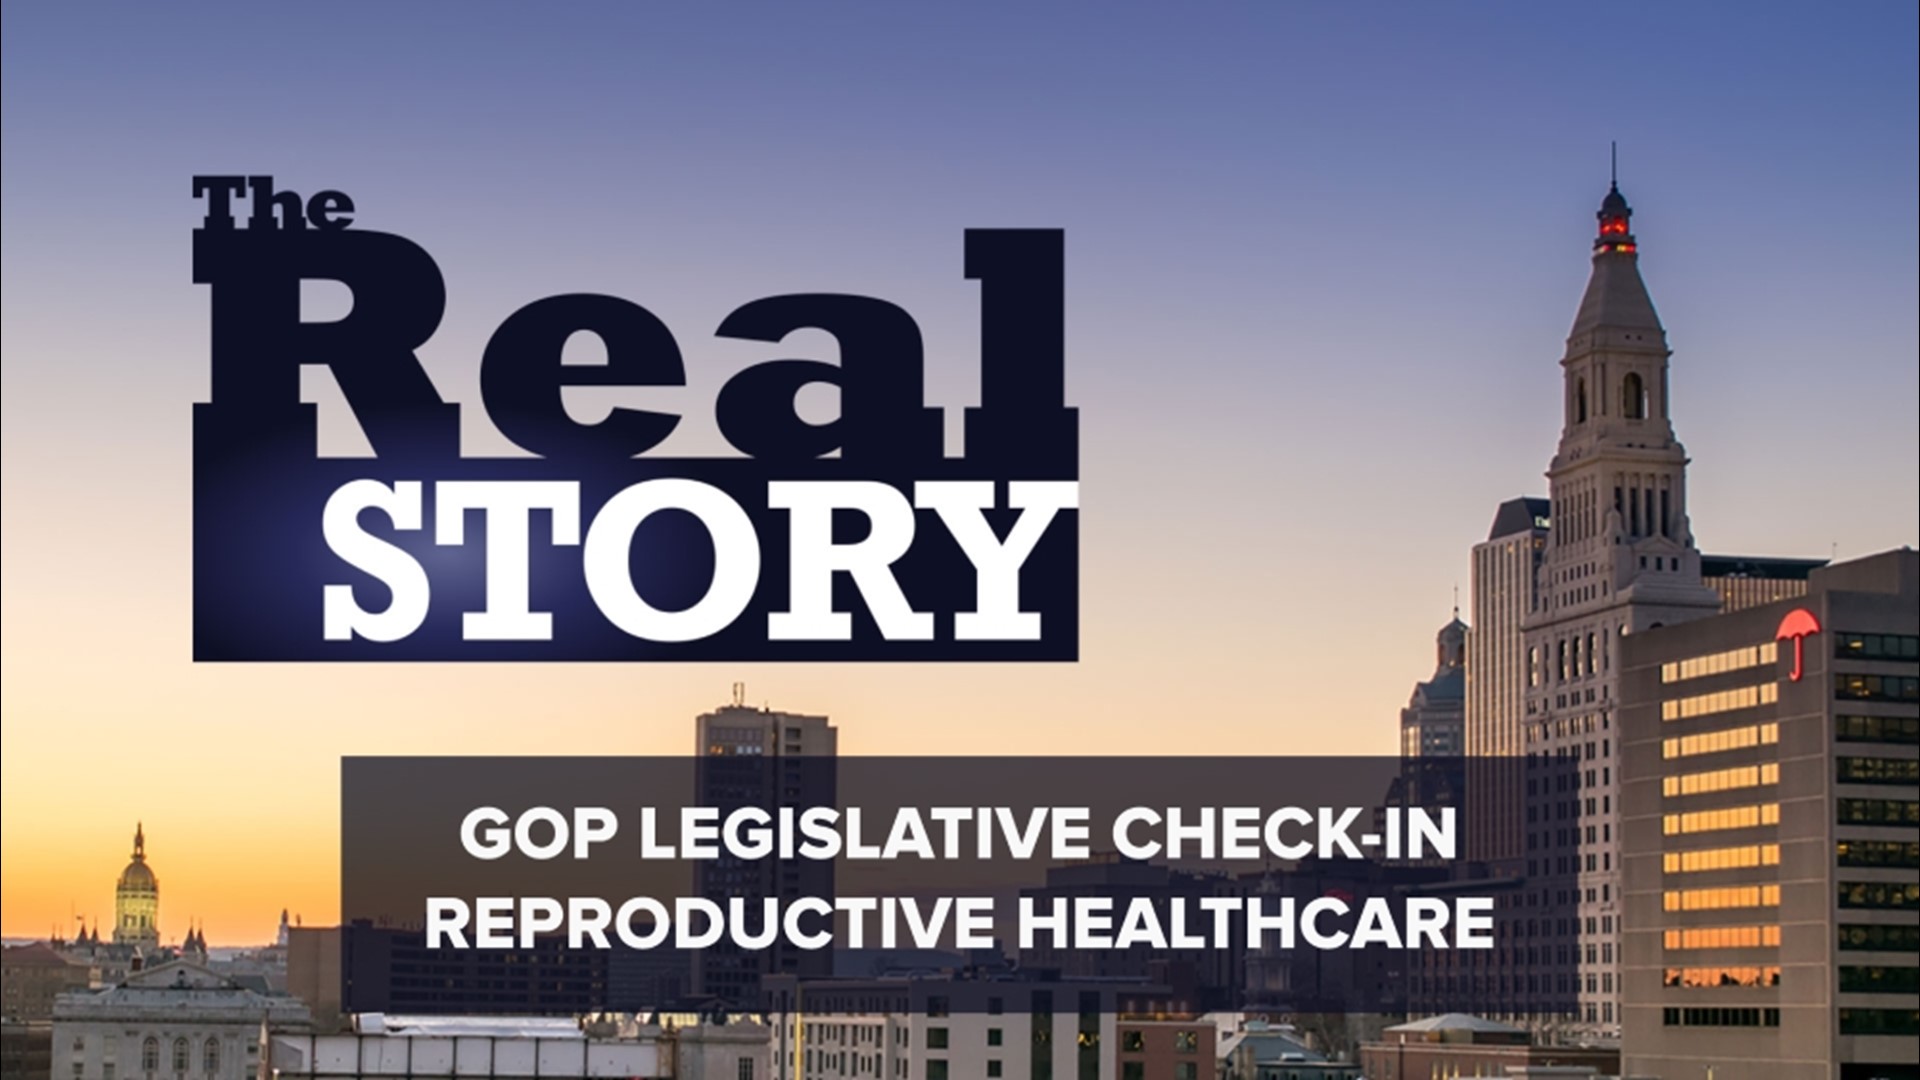 Host Emma Wulfhorst speaks with Sen. Kevin Kelly and Rep. Matt Blumenthal to discuss legislative priorities and the fight for reproductive healthcare.